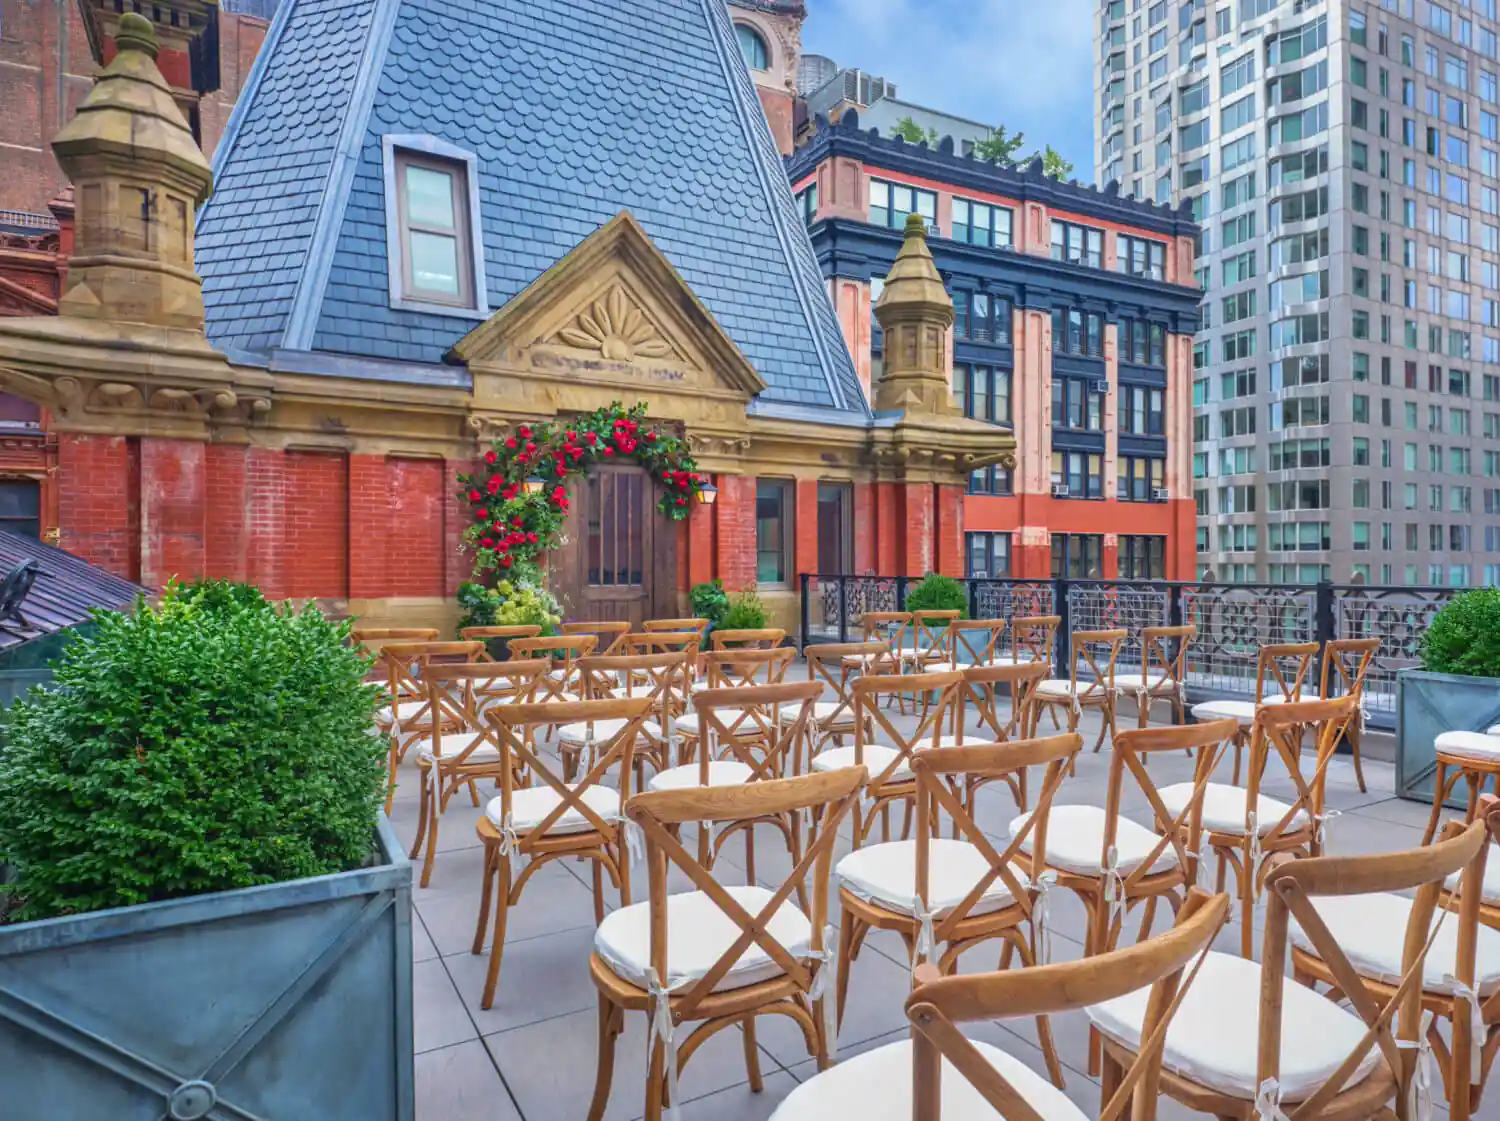 Lots of chairs on the rooftop of The Beekman Hotel